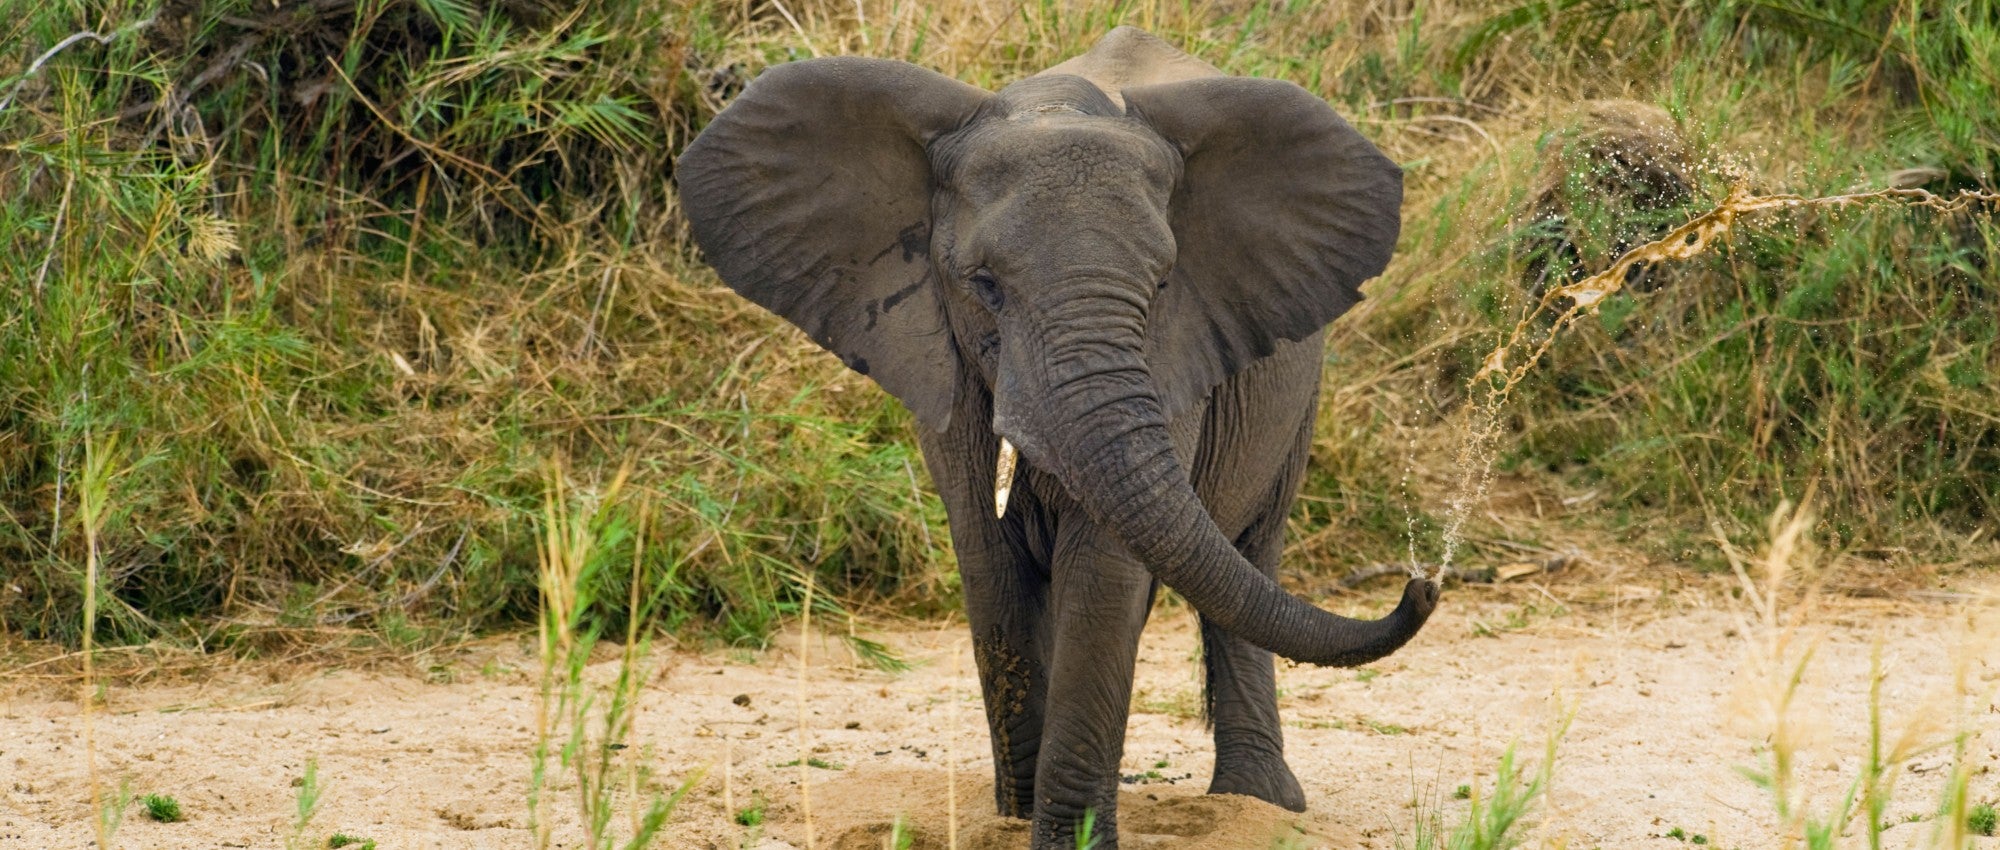 Brutal killing of African elephant highlights need to end trophy hunting